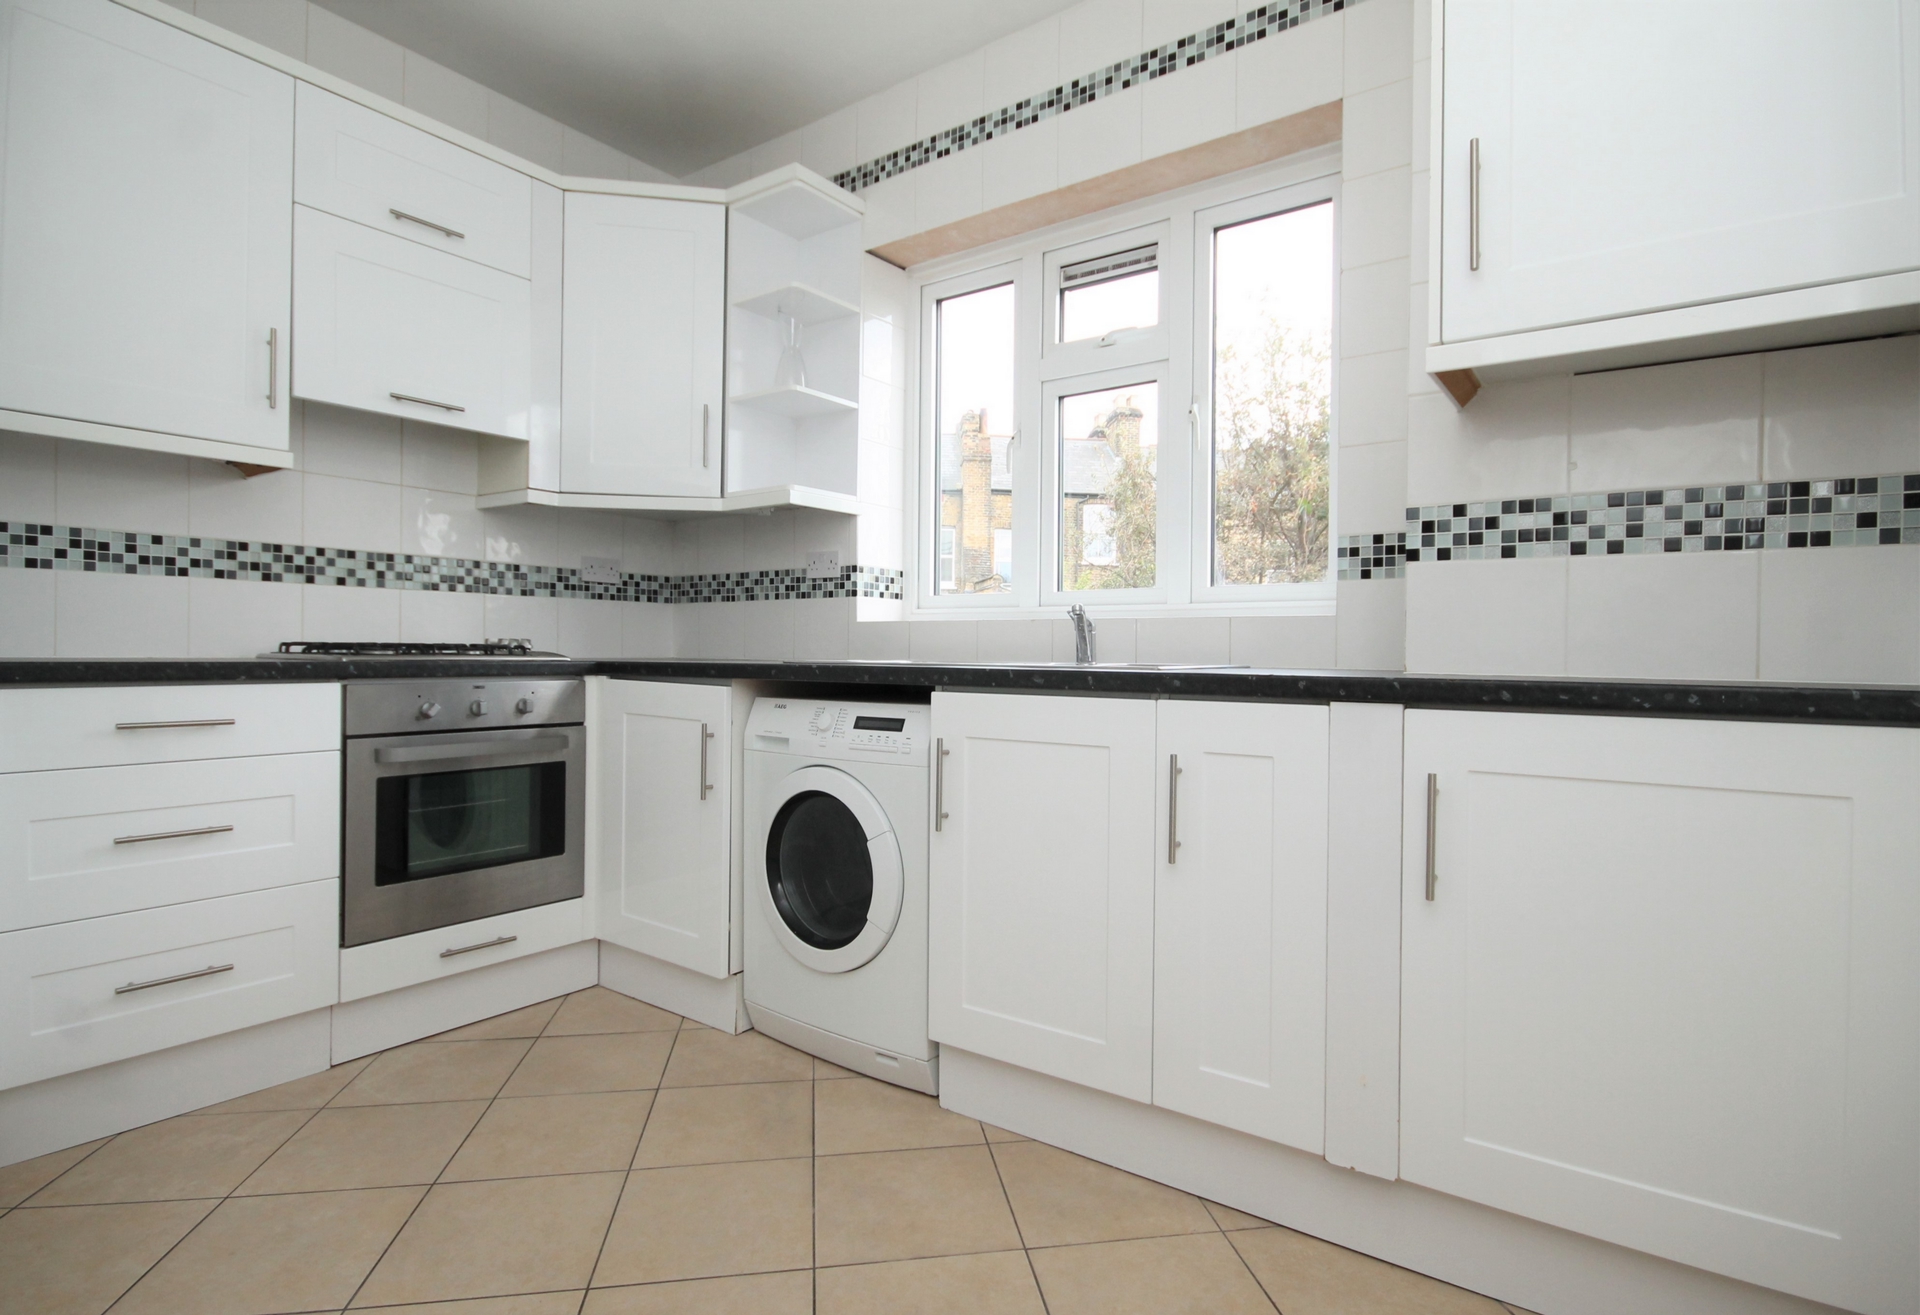 3 Bedroom Flat to rent in Kentish Town, London, NW5